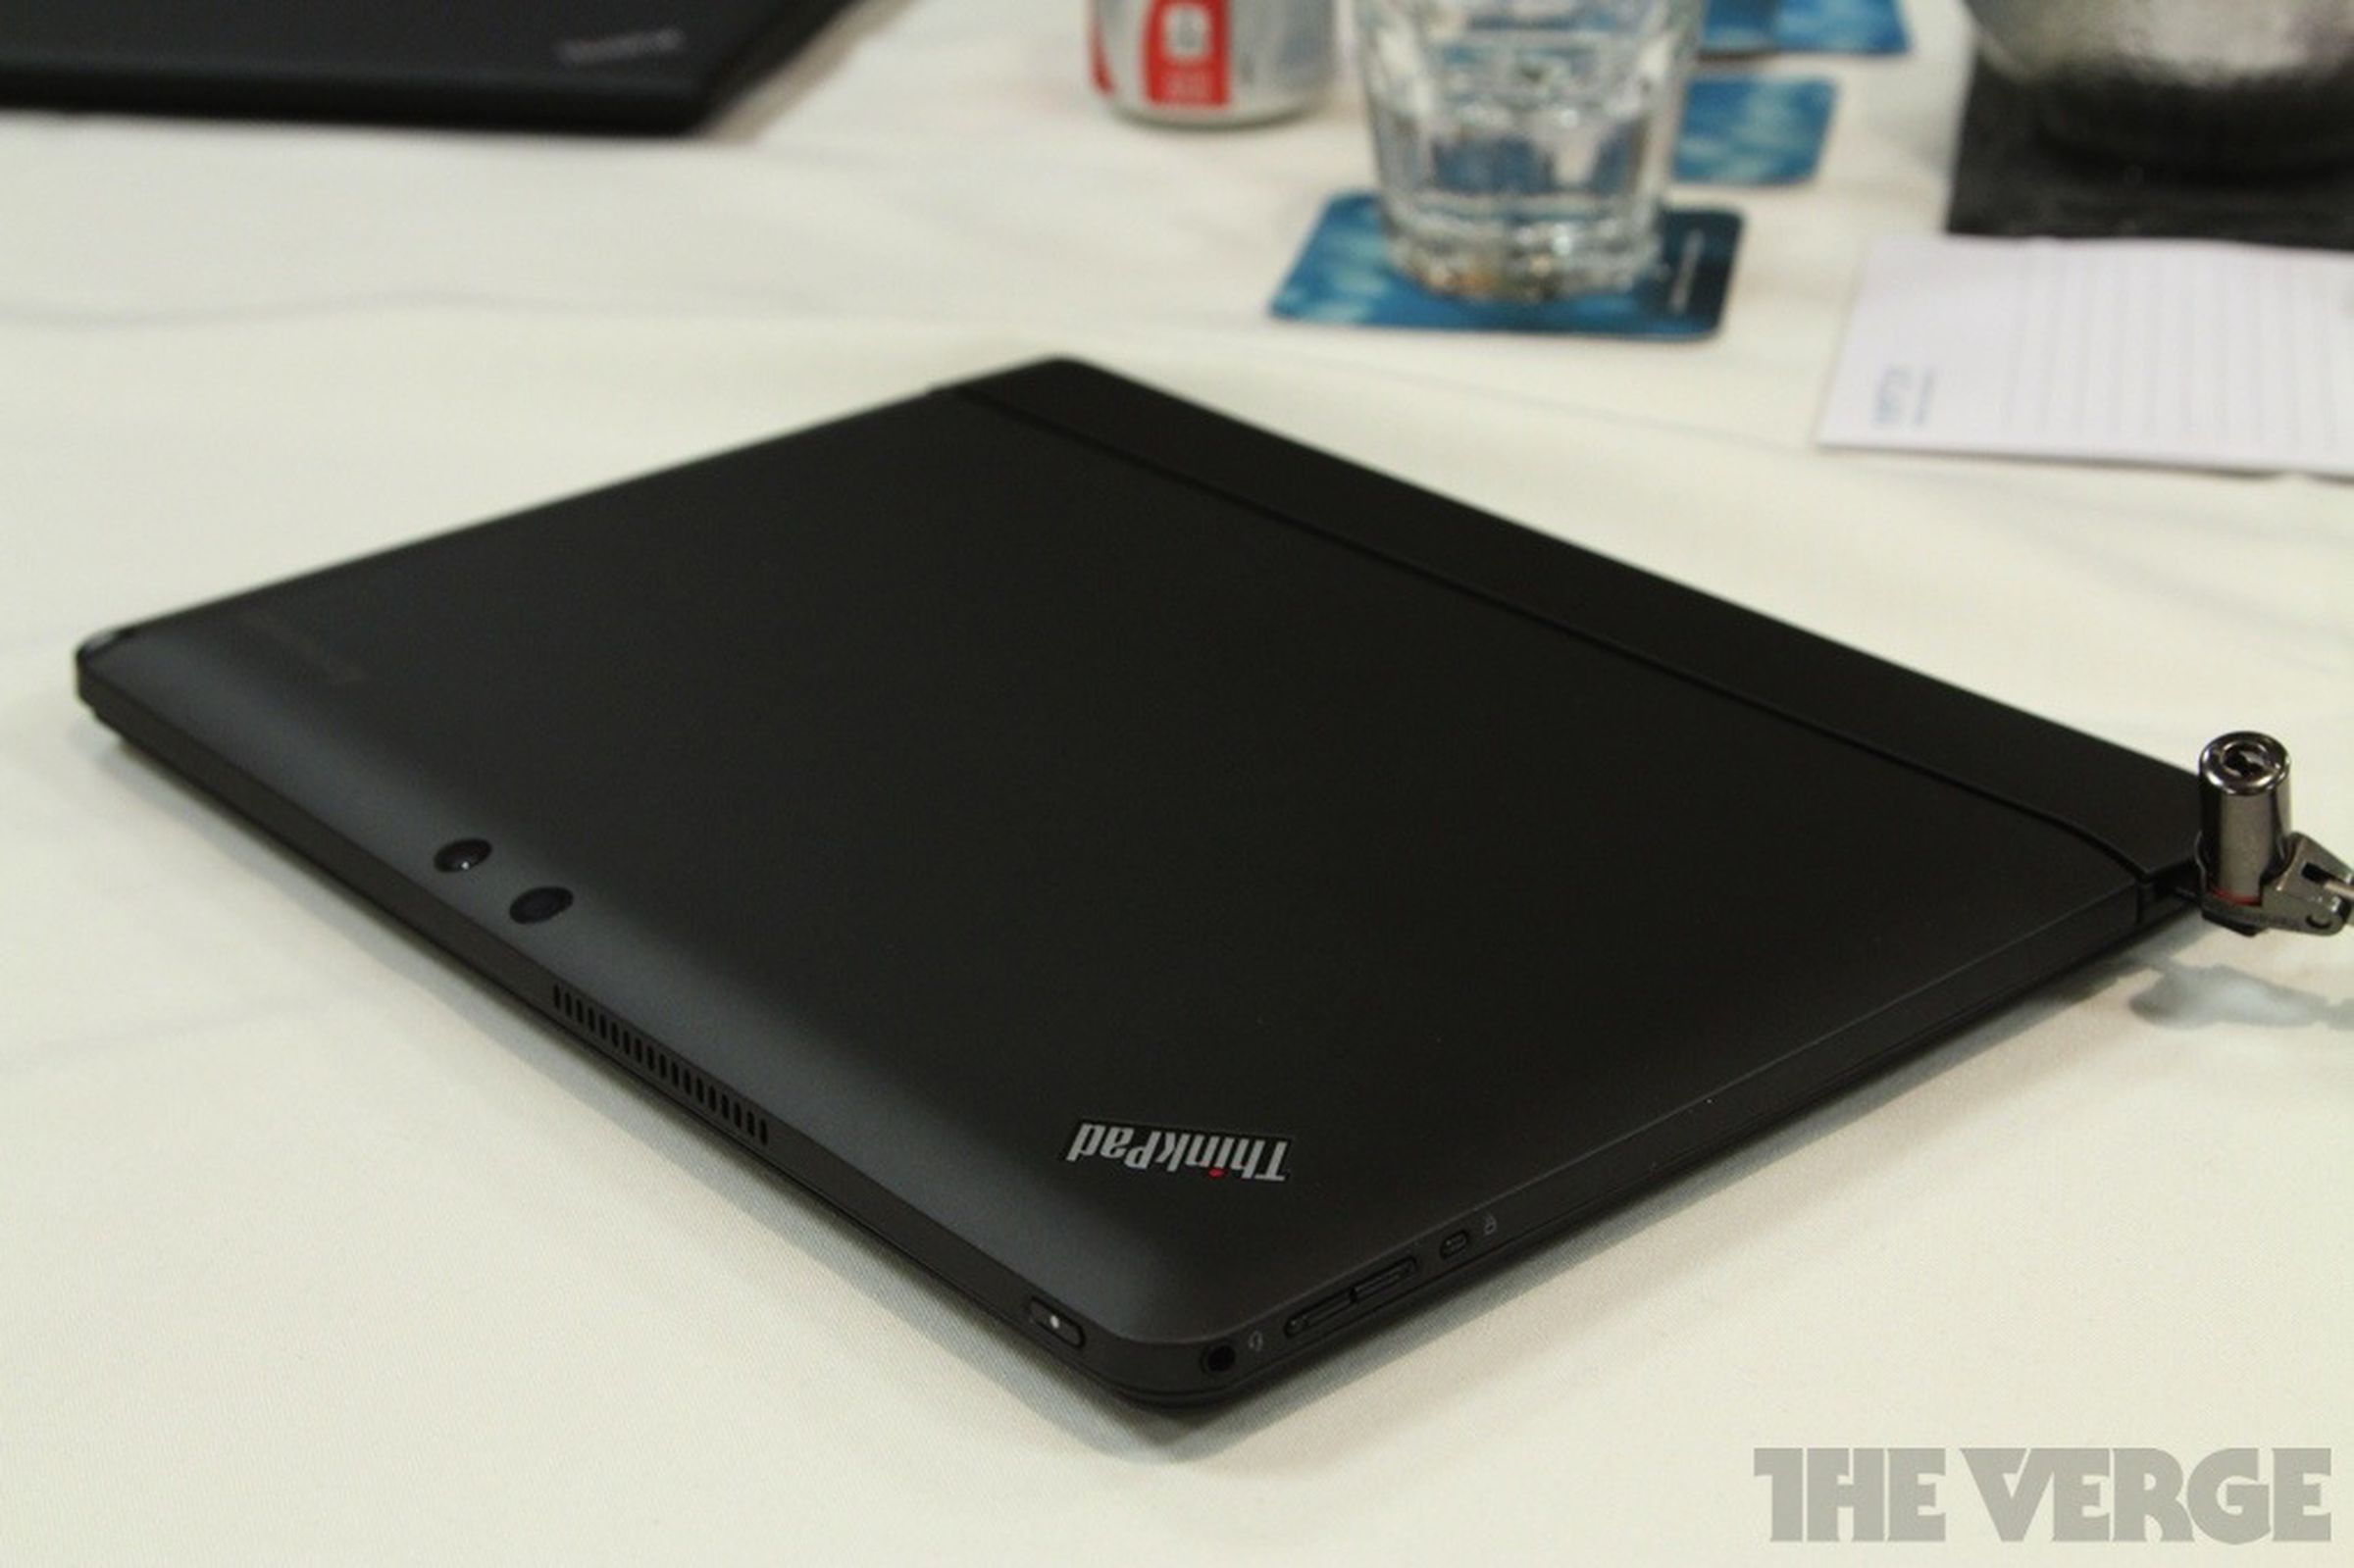 Lenovo ThinkPad Helix hands-on pictures